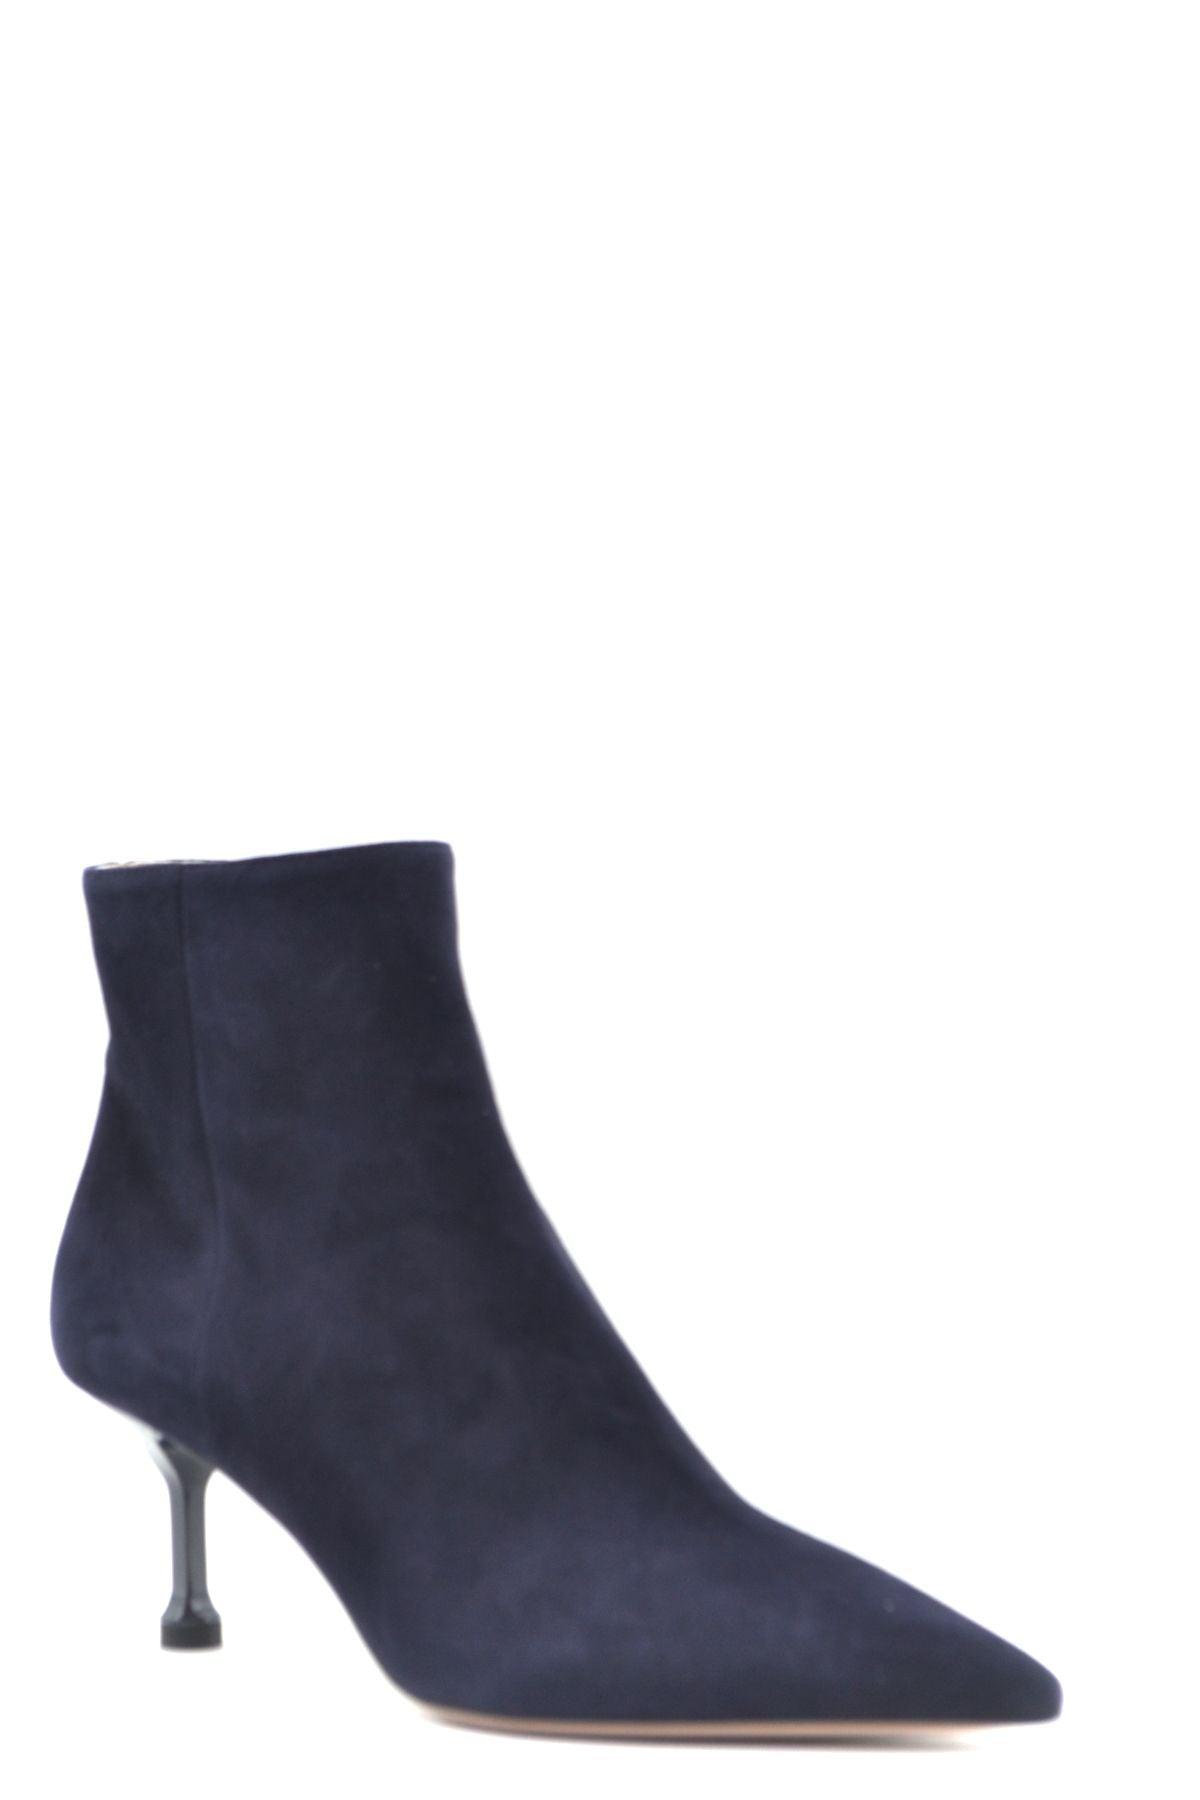 Prada Suede Pointed Ankle Boots in Blue | Lyst